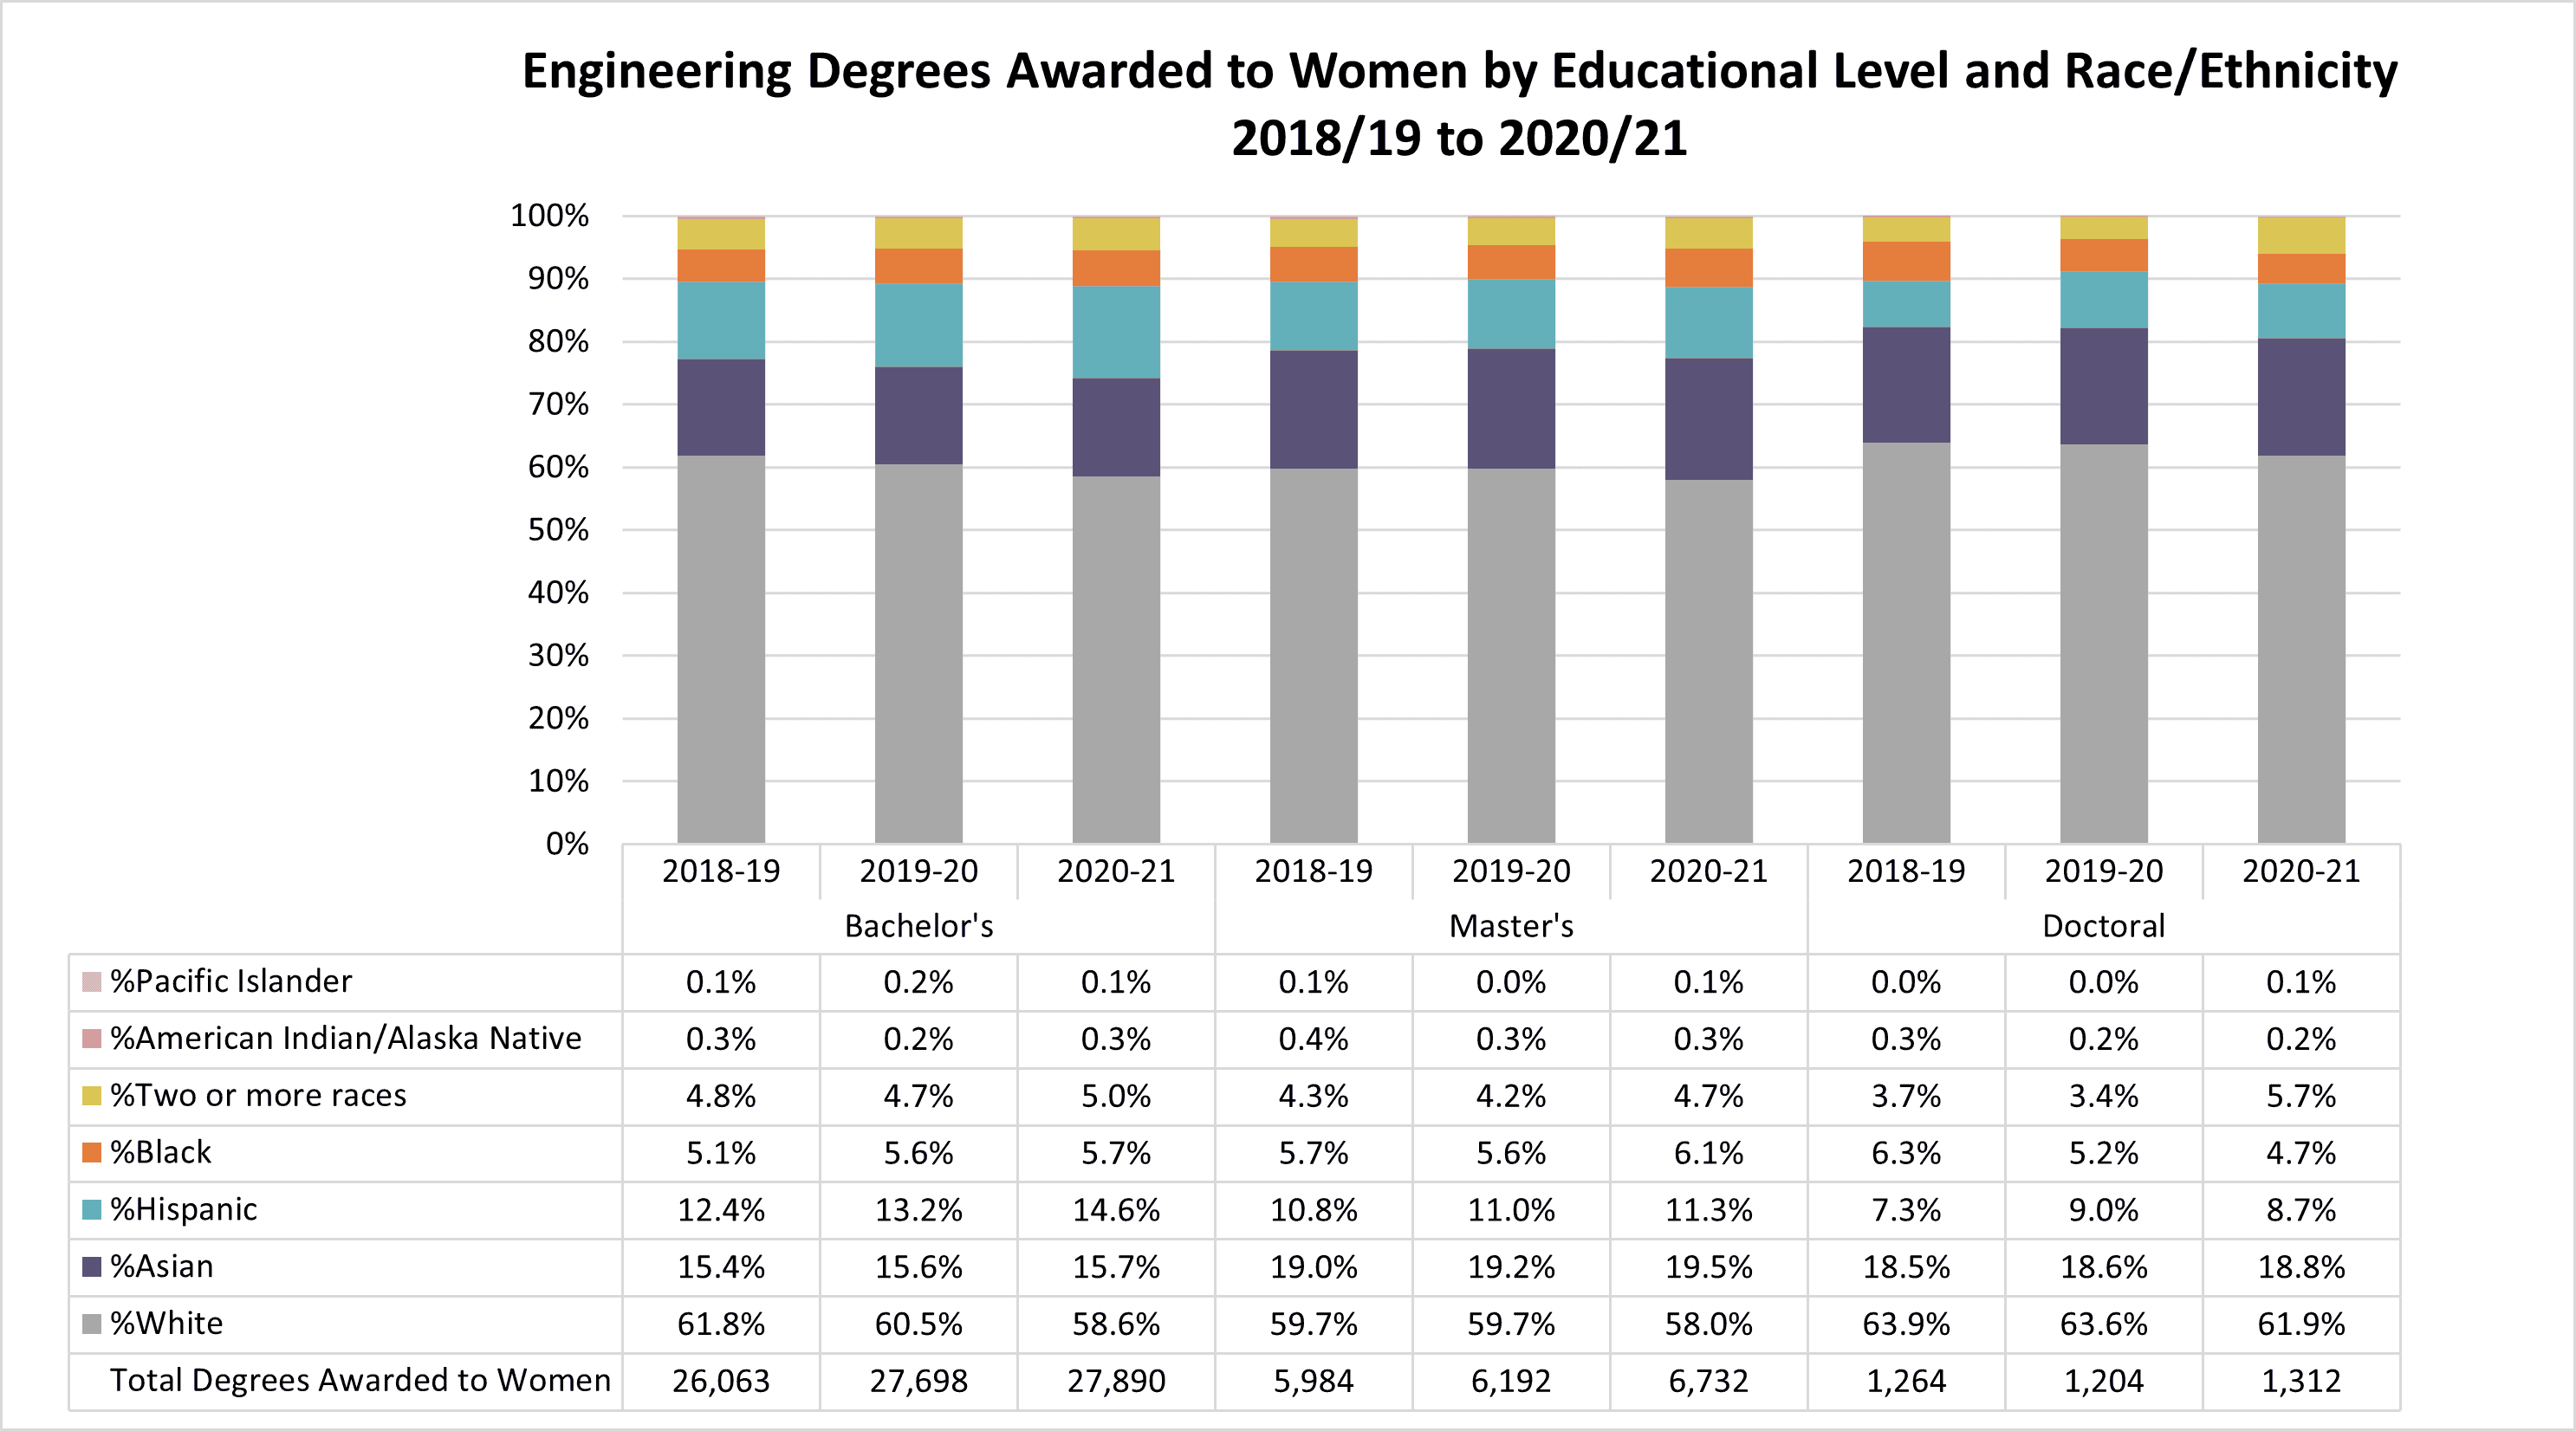 Engineering degrees awarded to women by race